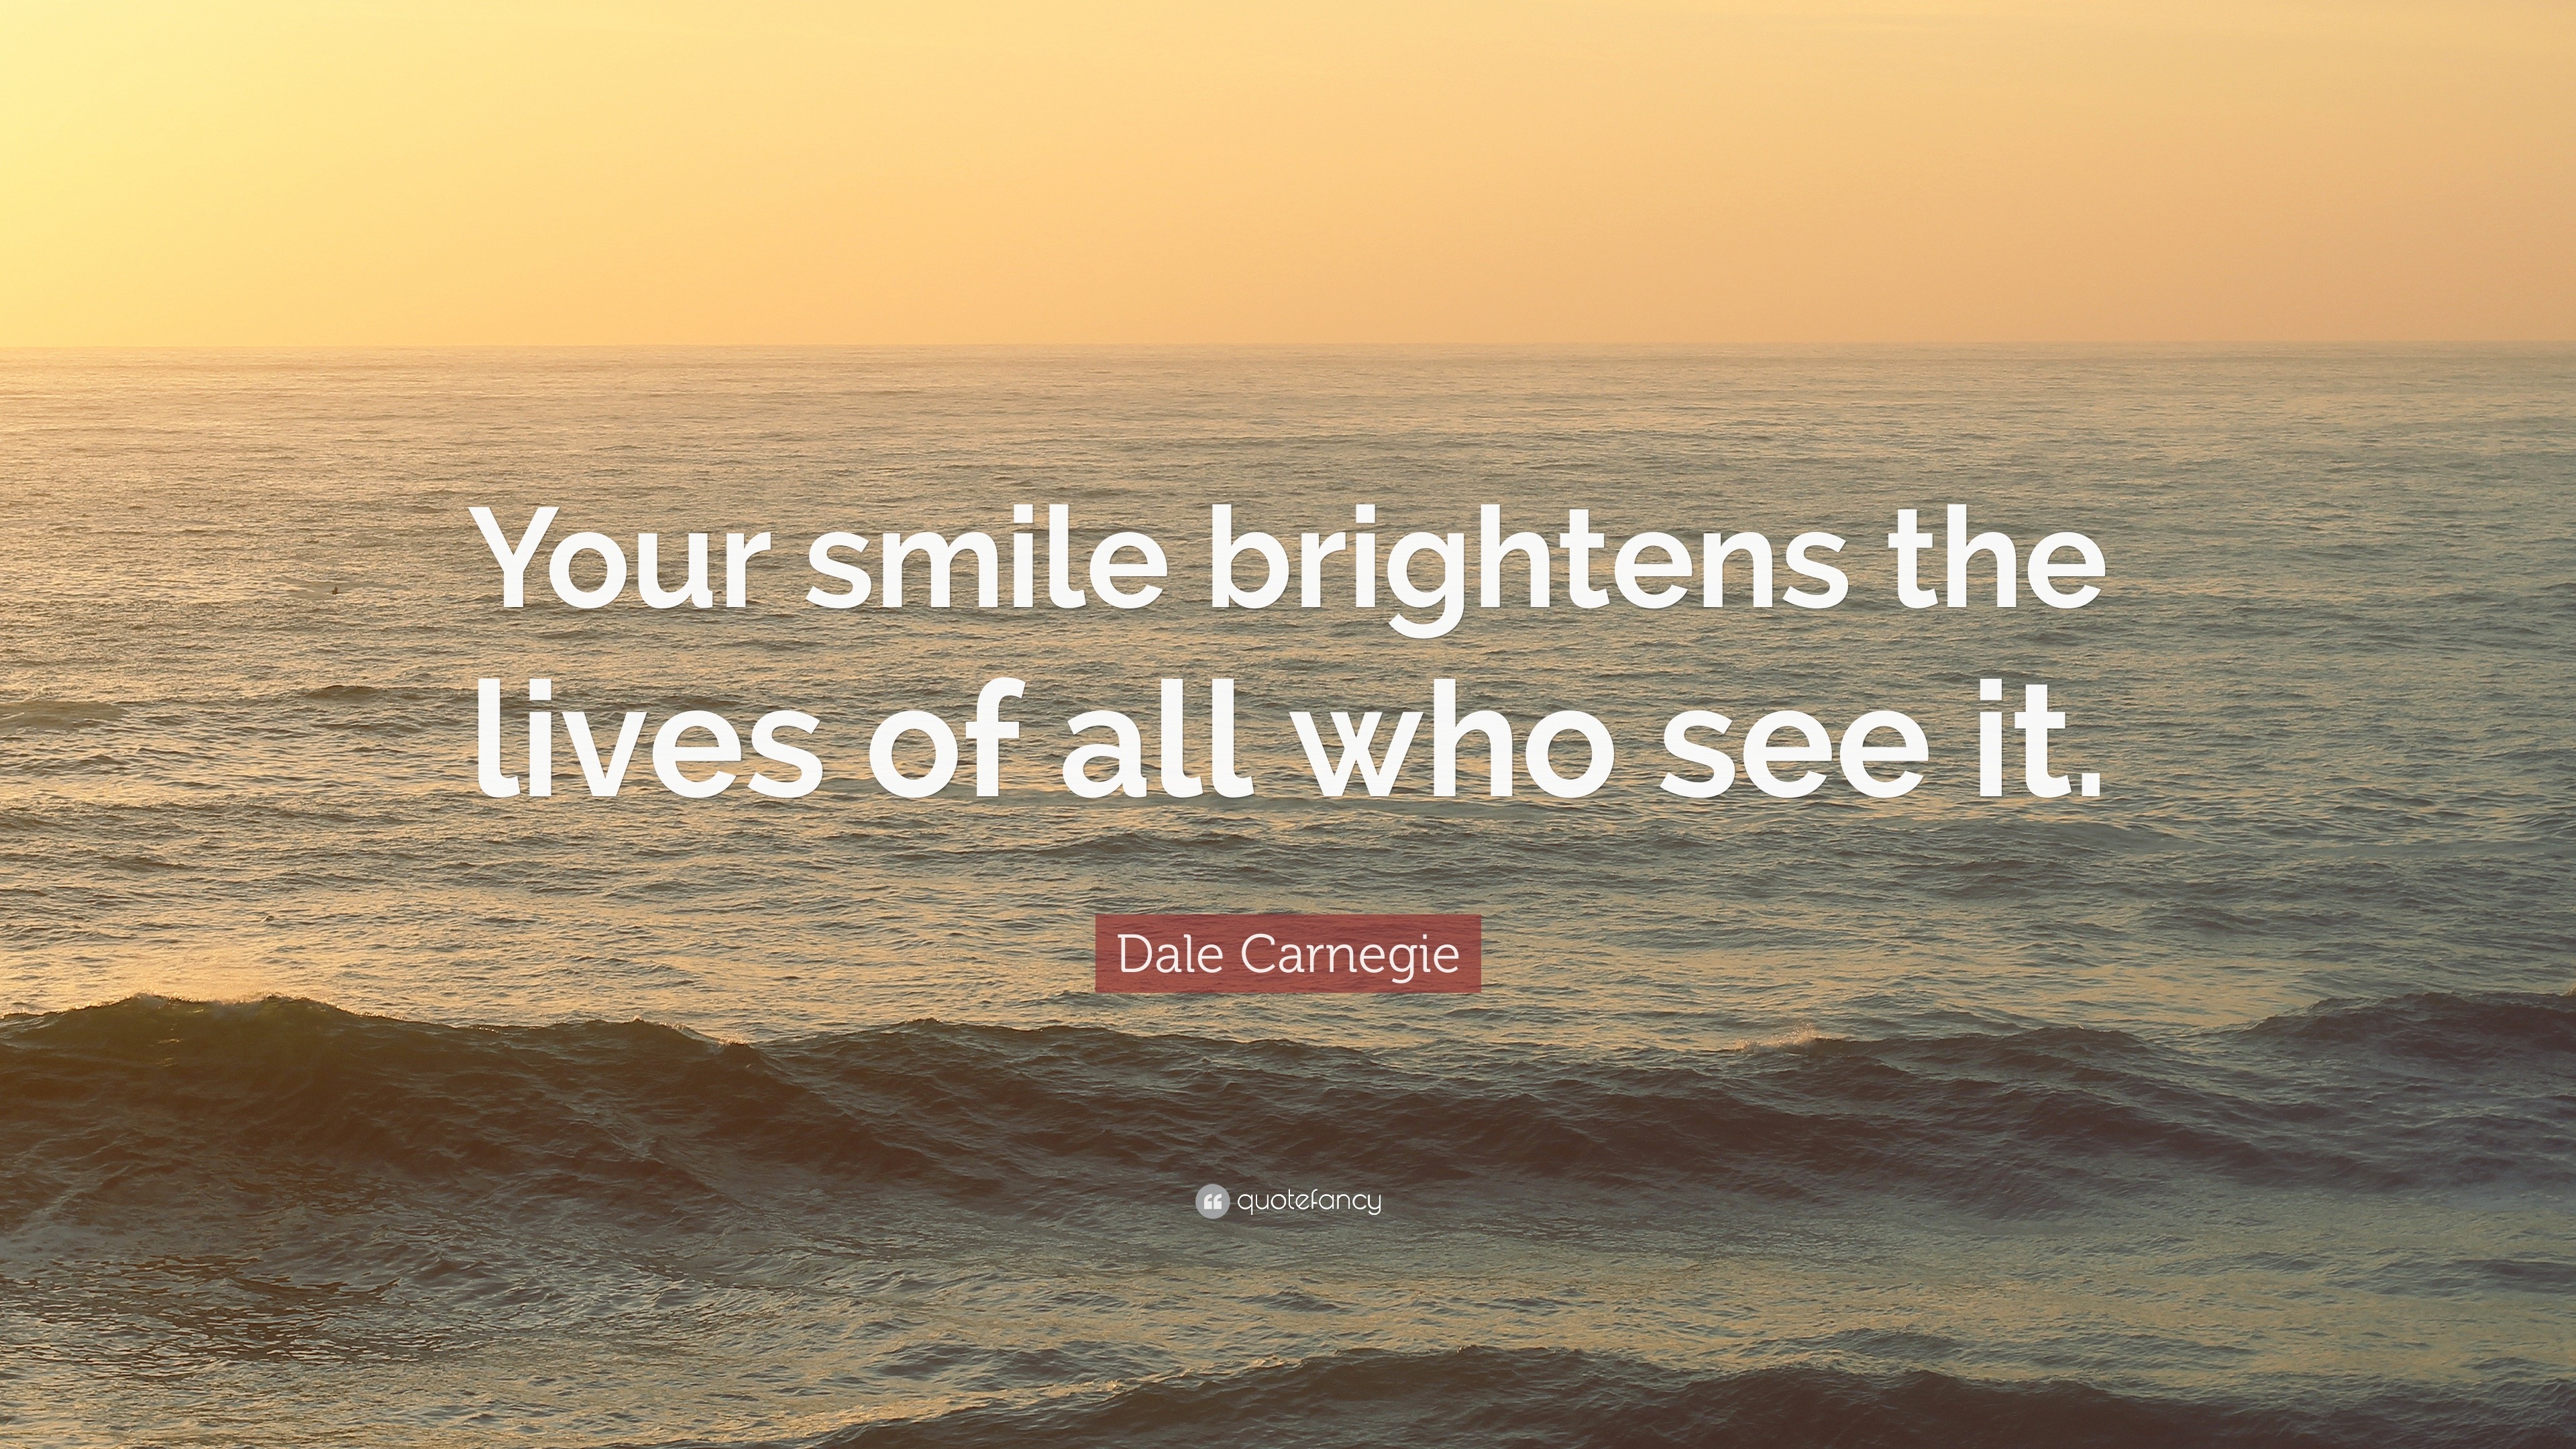 Dale Carnegie Quote Your Smile Brightens The Lives Of All Who See It 10 Wallpapers Quotefancy